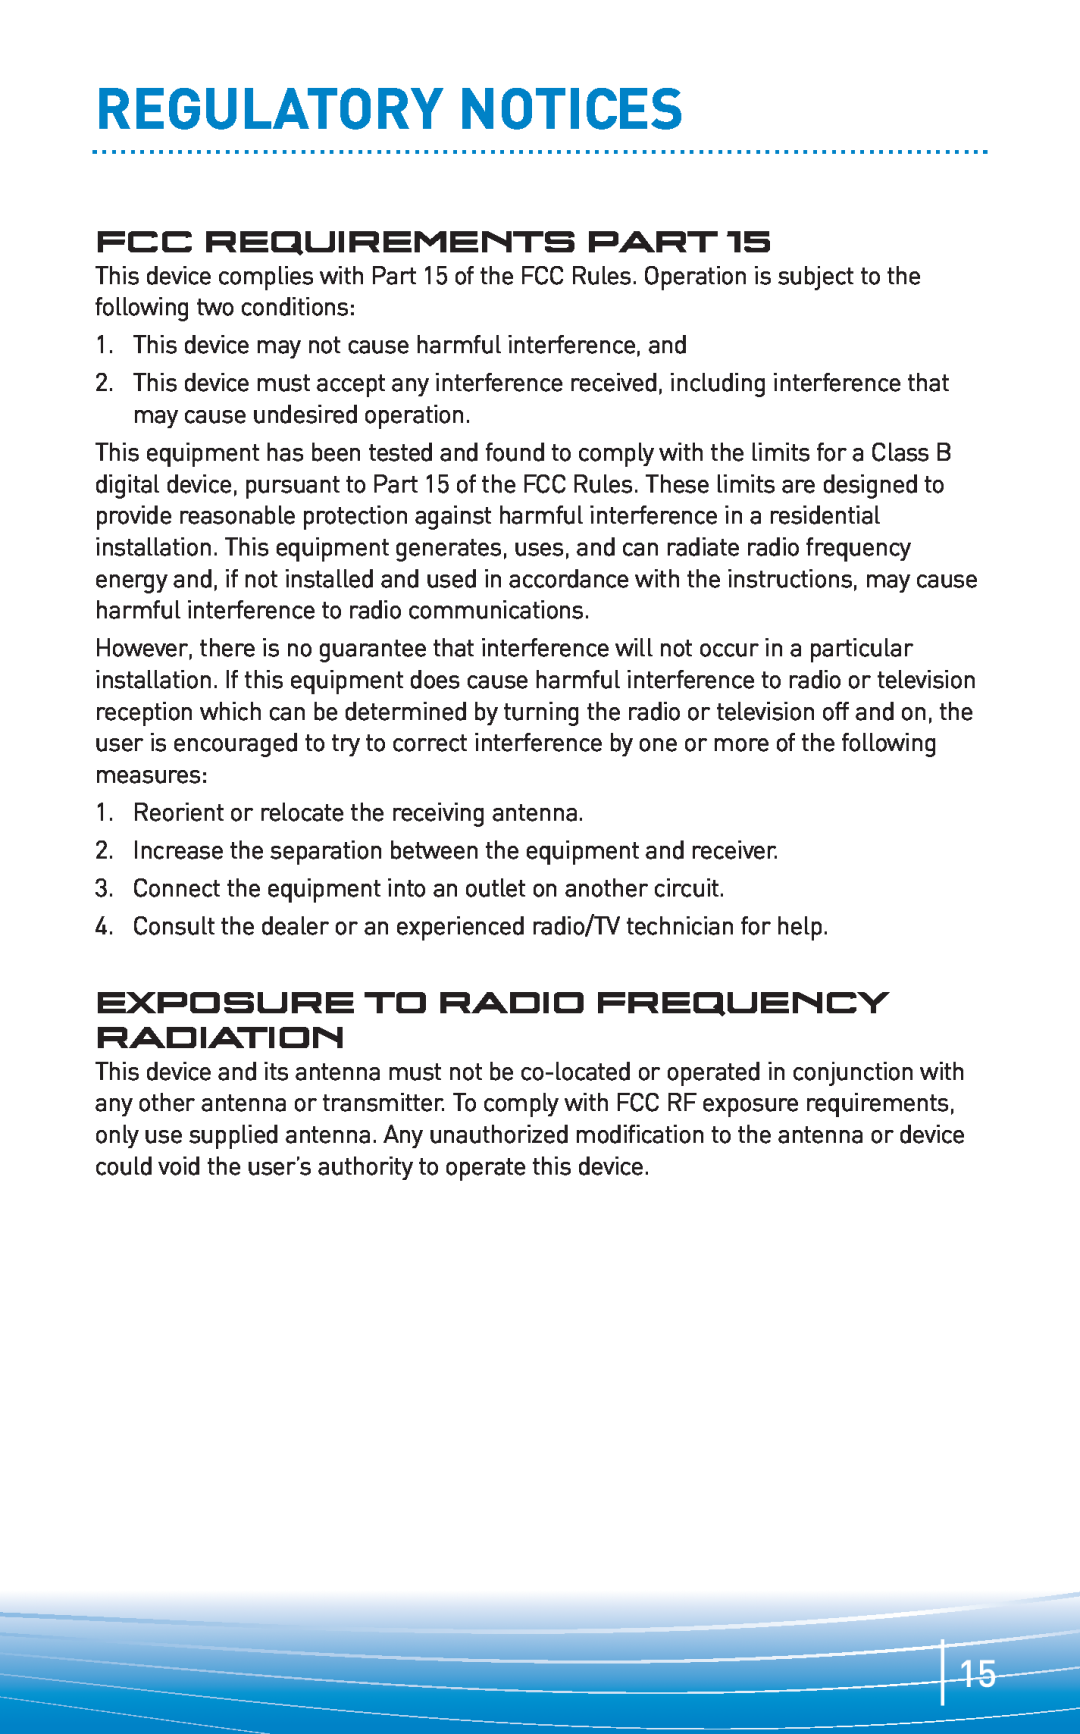 Plantronics 665 manual Regulatory Notices, Fcc Requirements Part, Exposure To Radio Frequency Radiation 